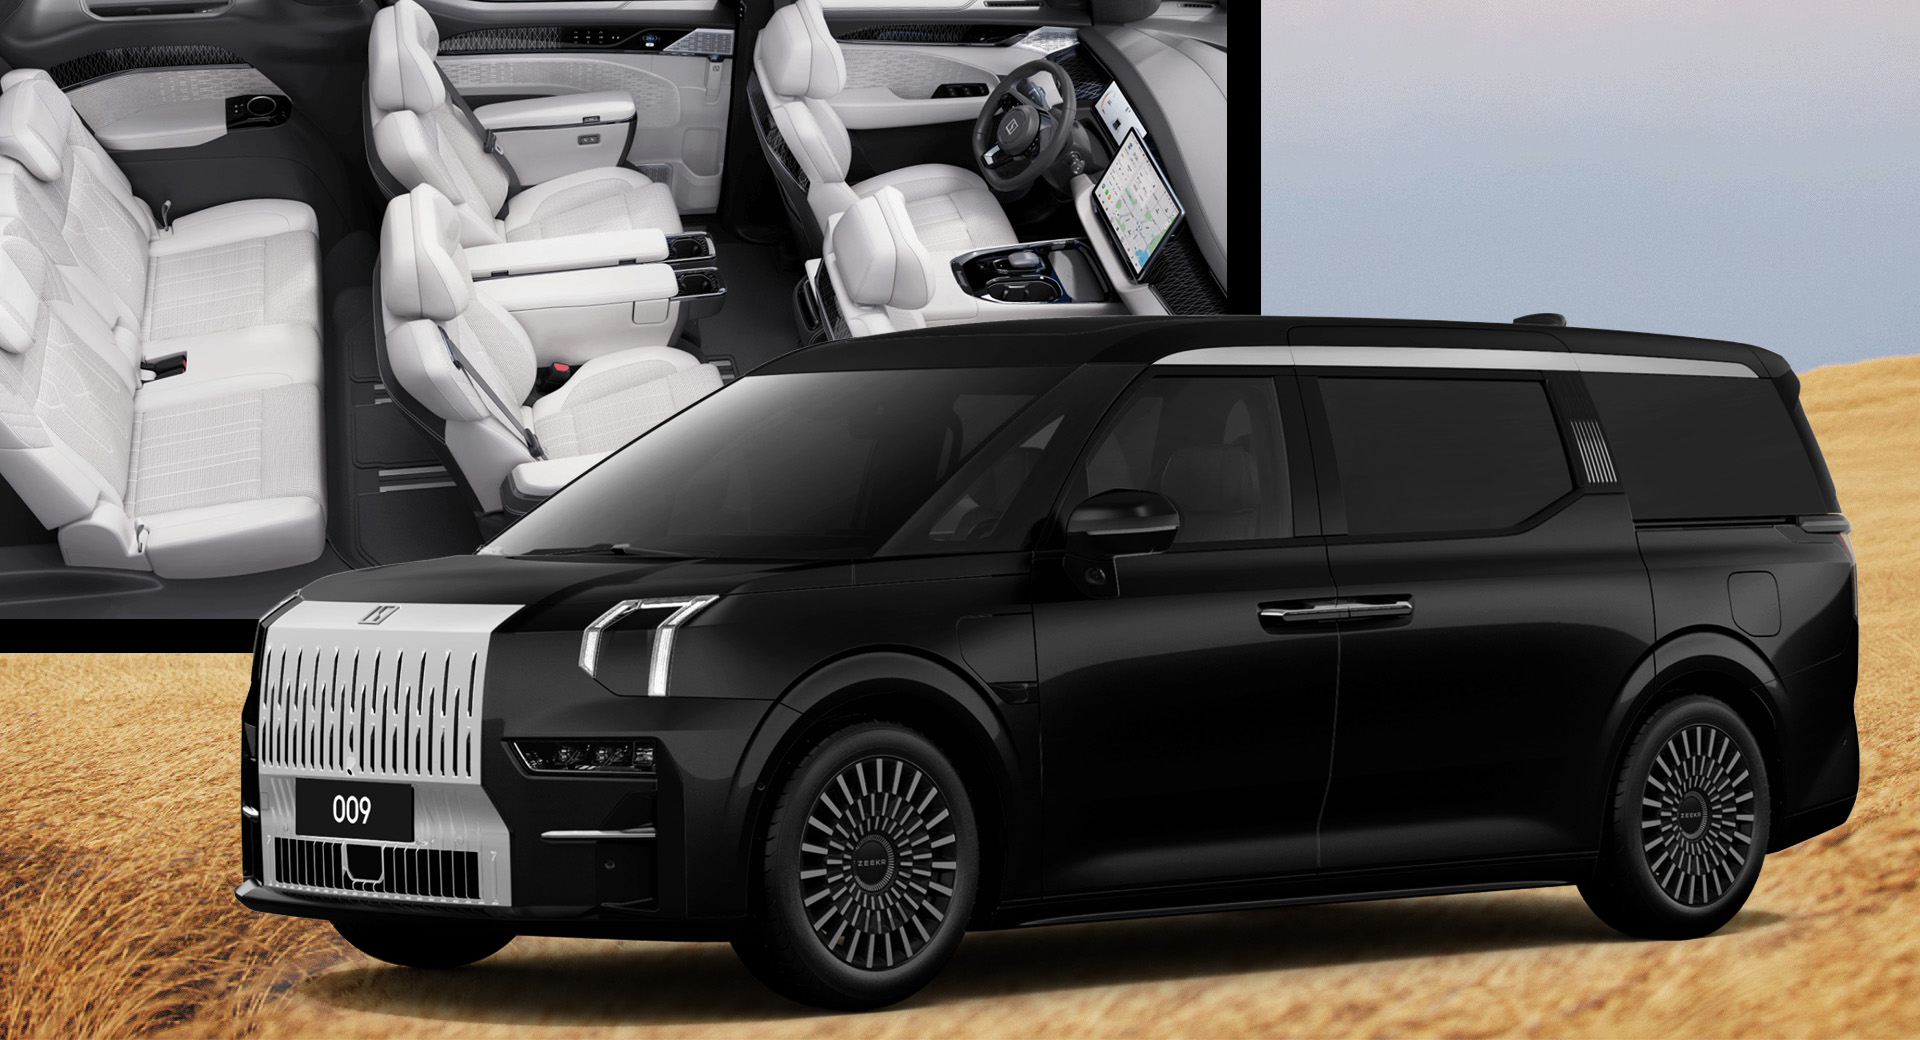 Zeekr 009 Is An Electric Luxury Minivan With 536 HP And 511 Miles